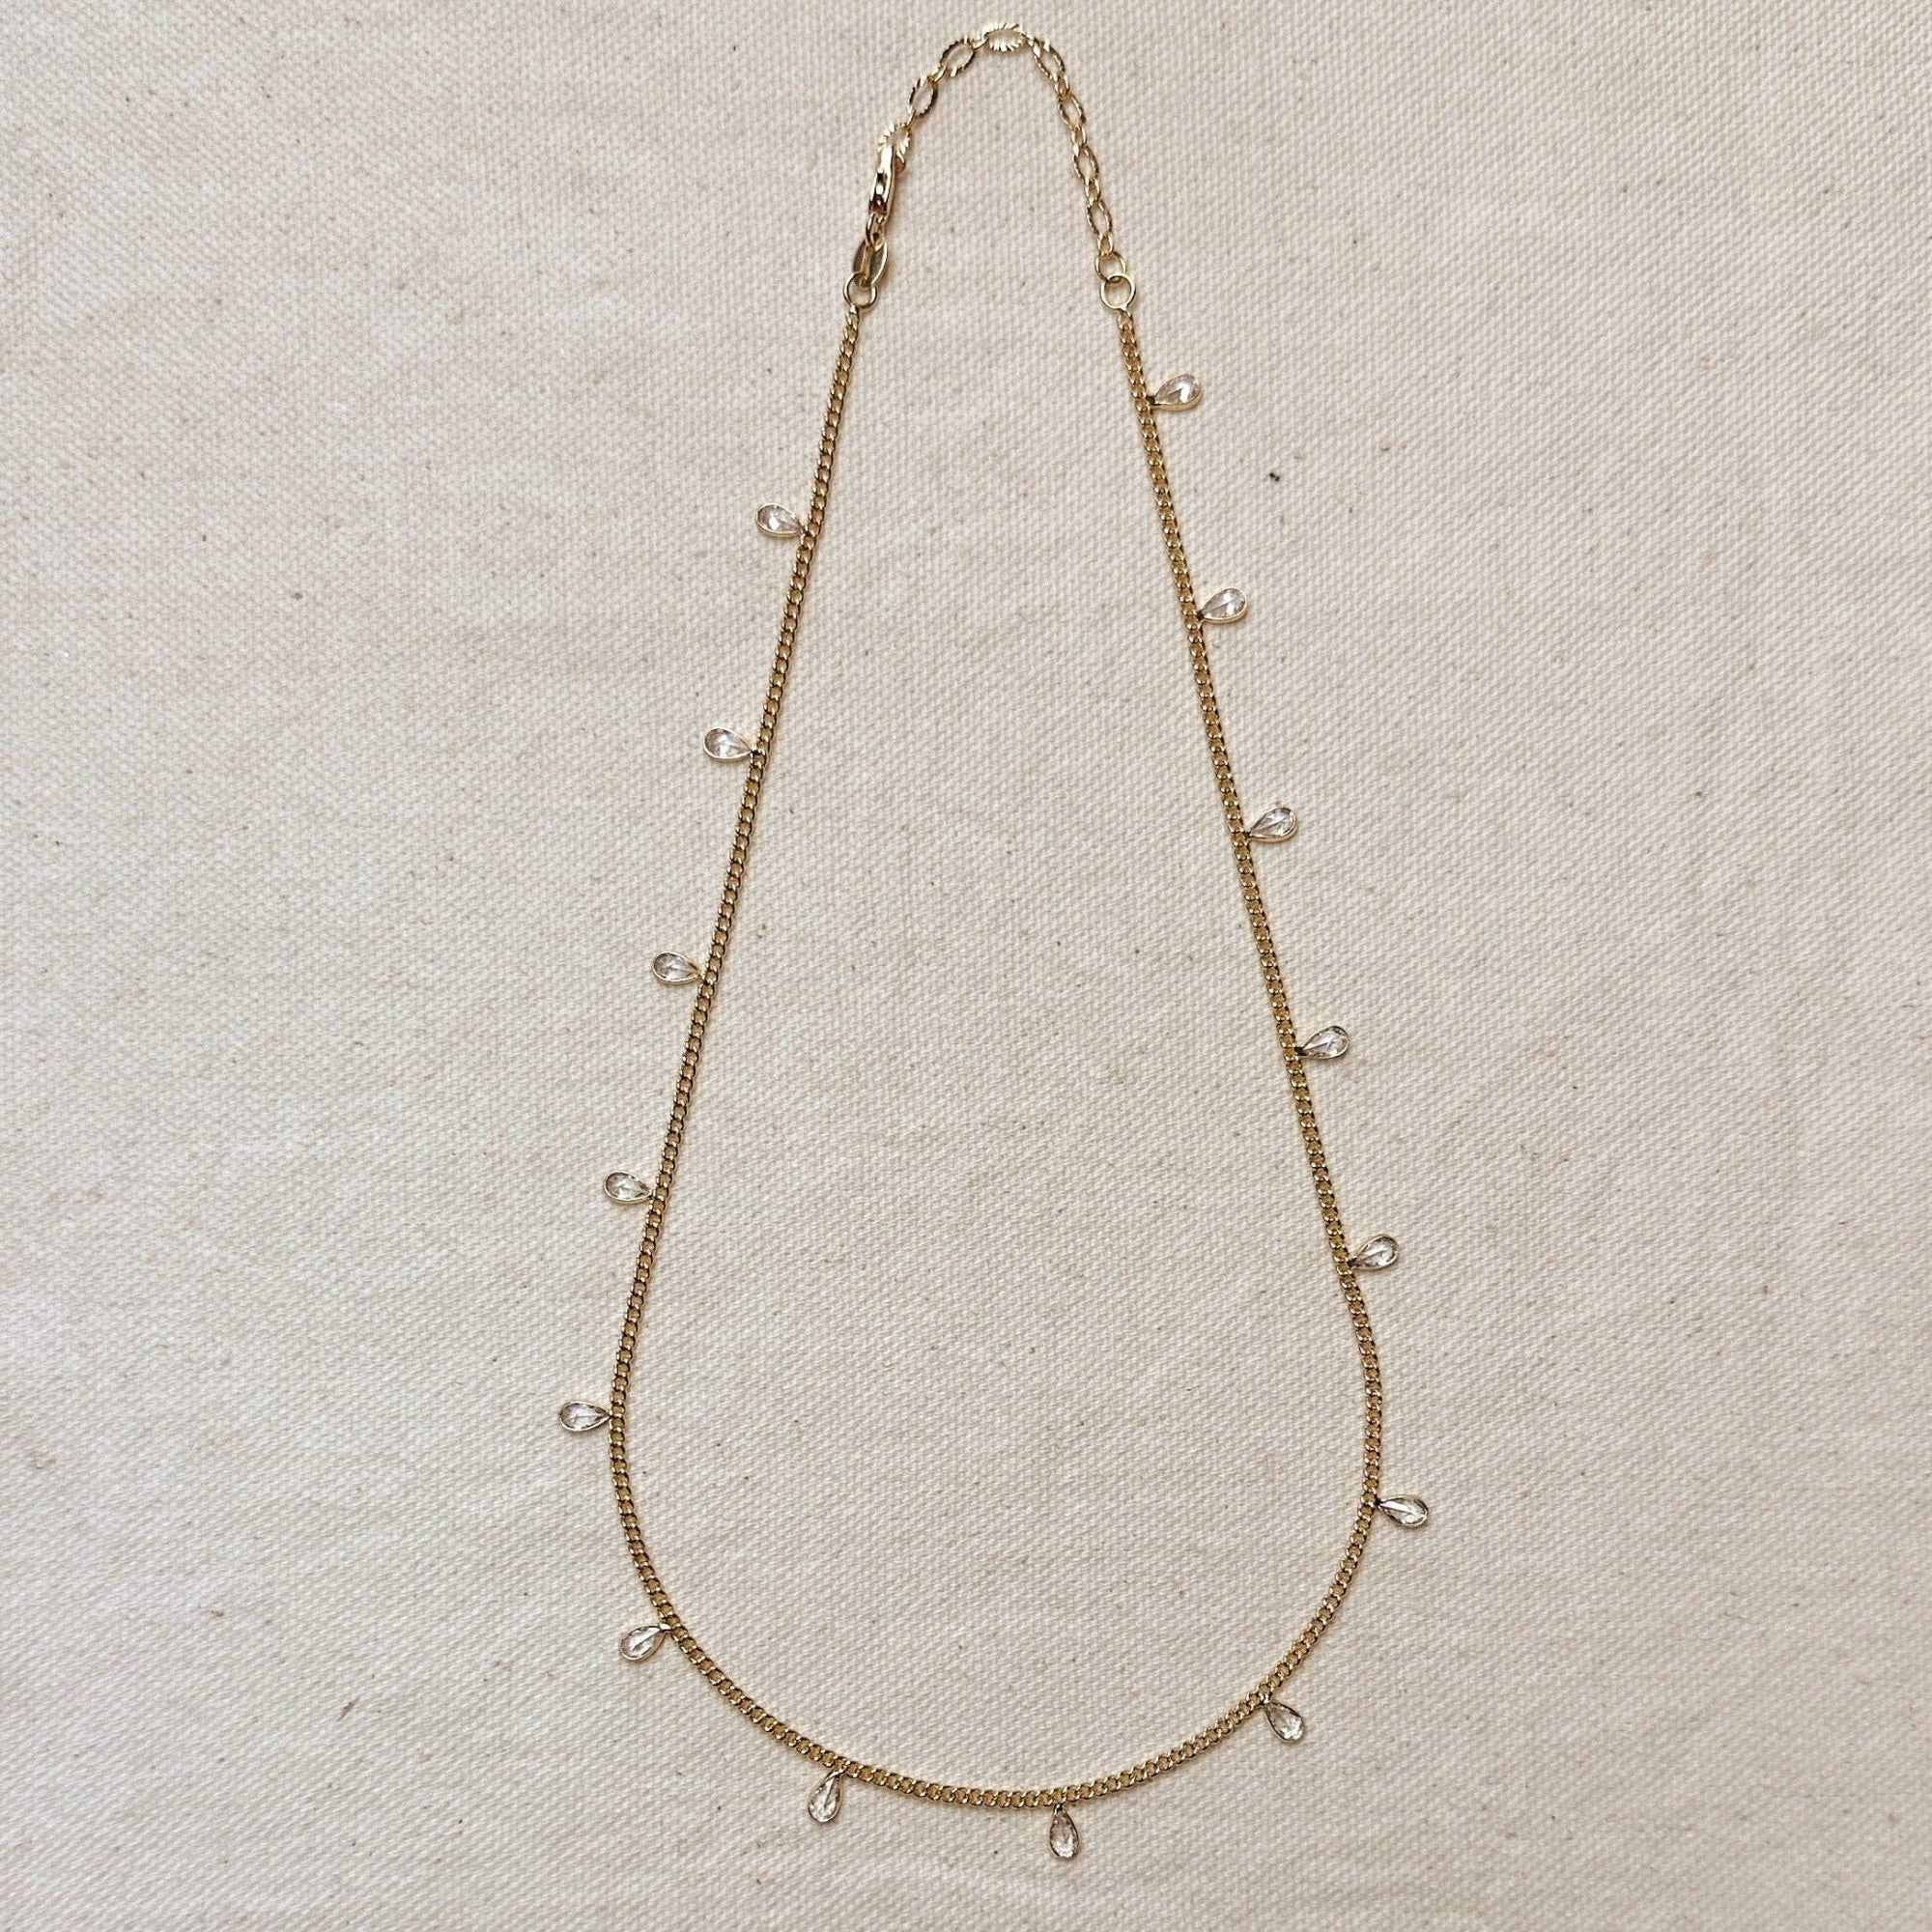 18k Gold Filled 2mm Curb Chain With Bezel CZ Drops Necklace - Abigail Fox Designs